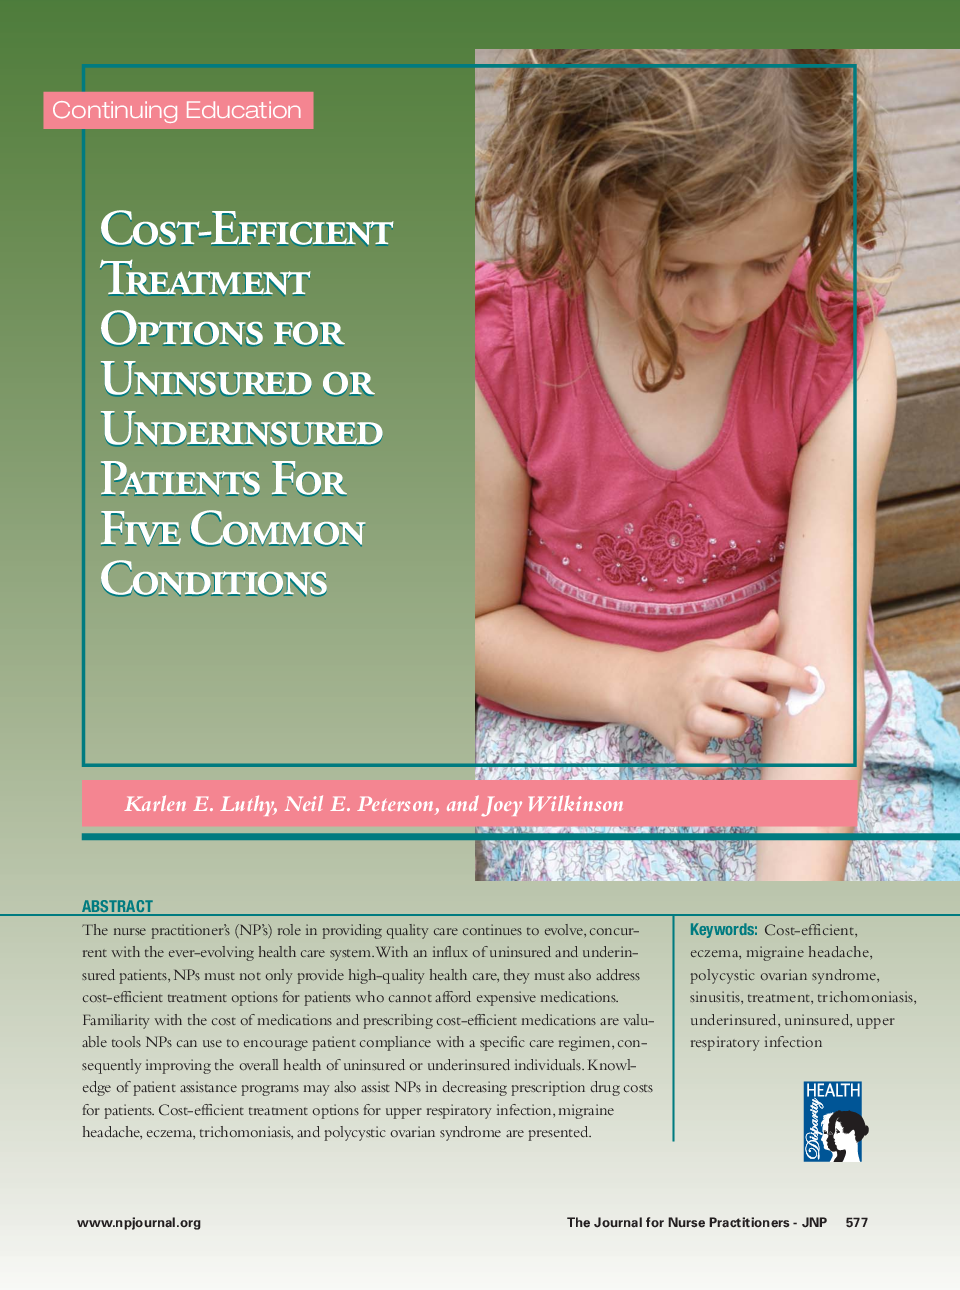 Cost-Efficient Treatment Options for Uninsured or Underinsured Patients For Five Common Conditions 